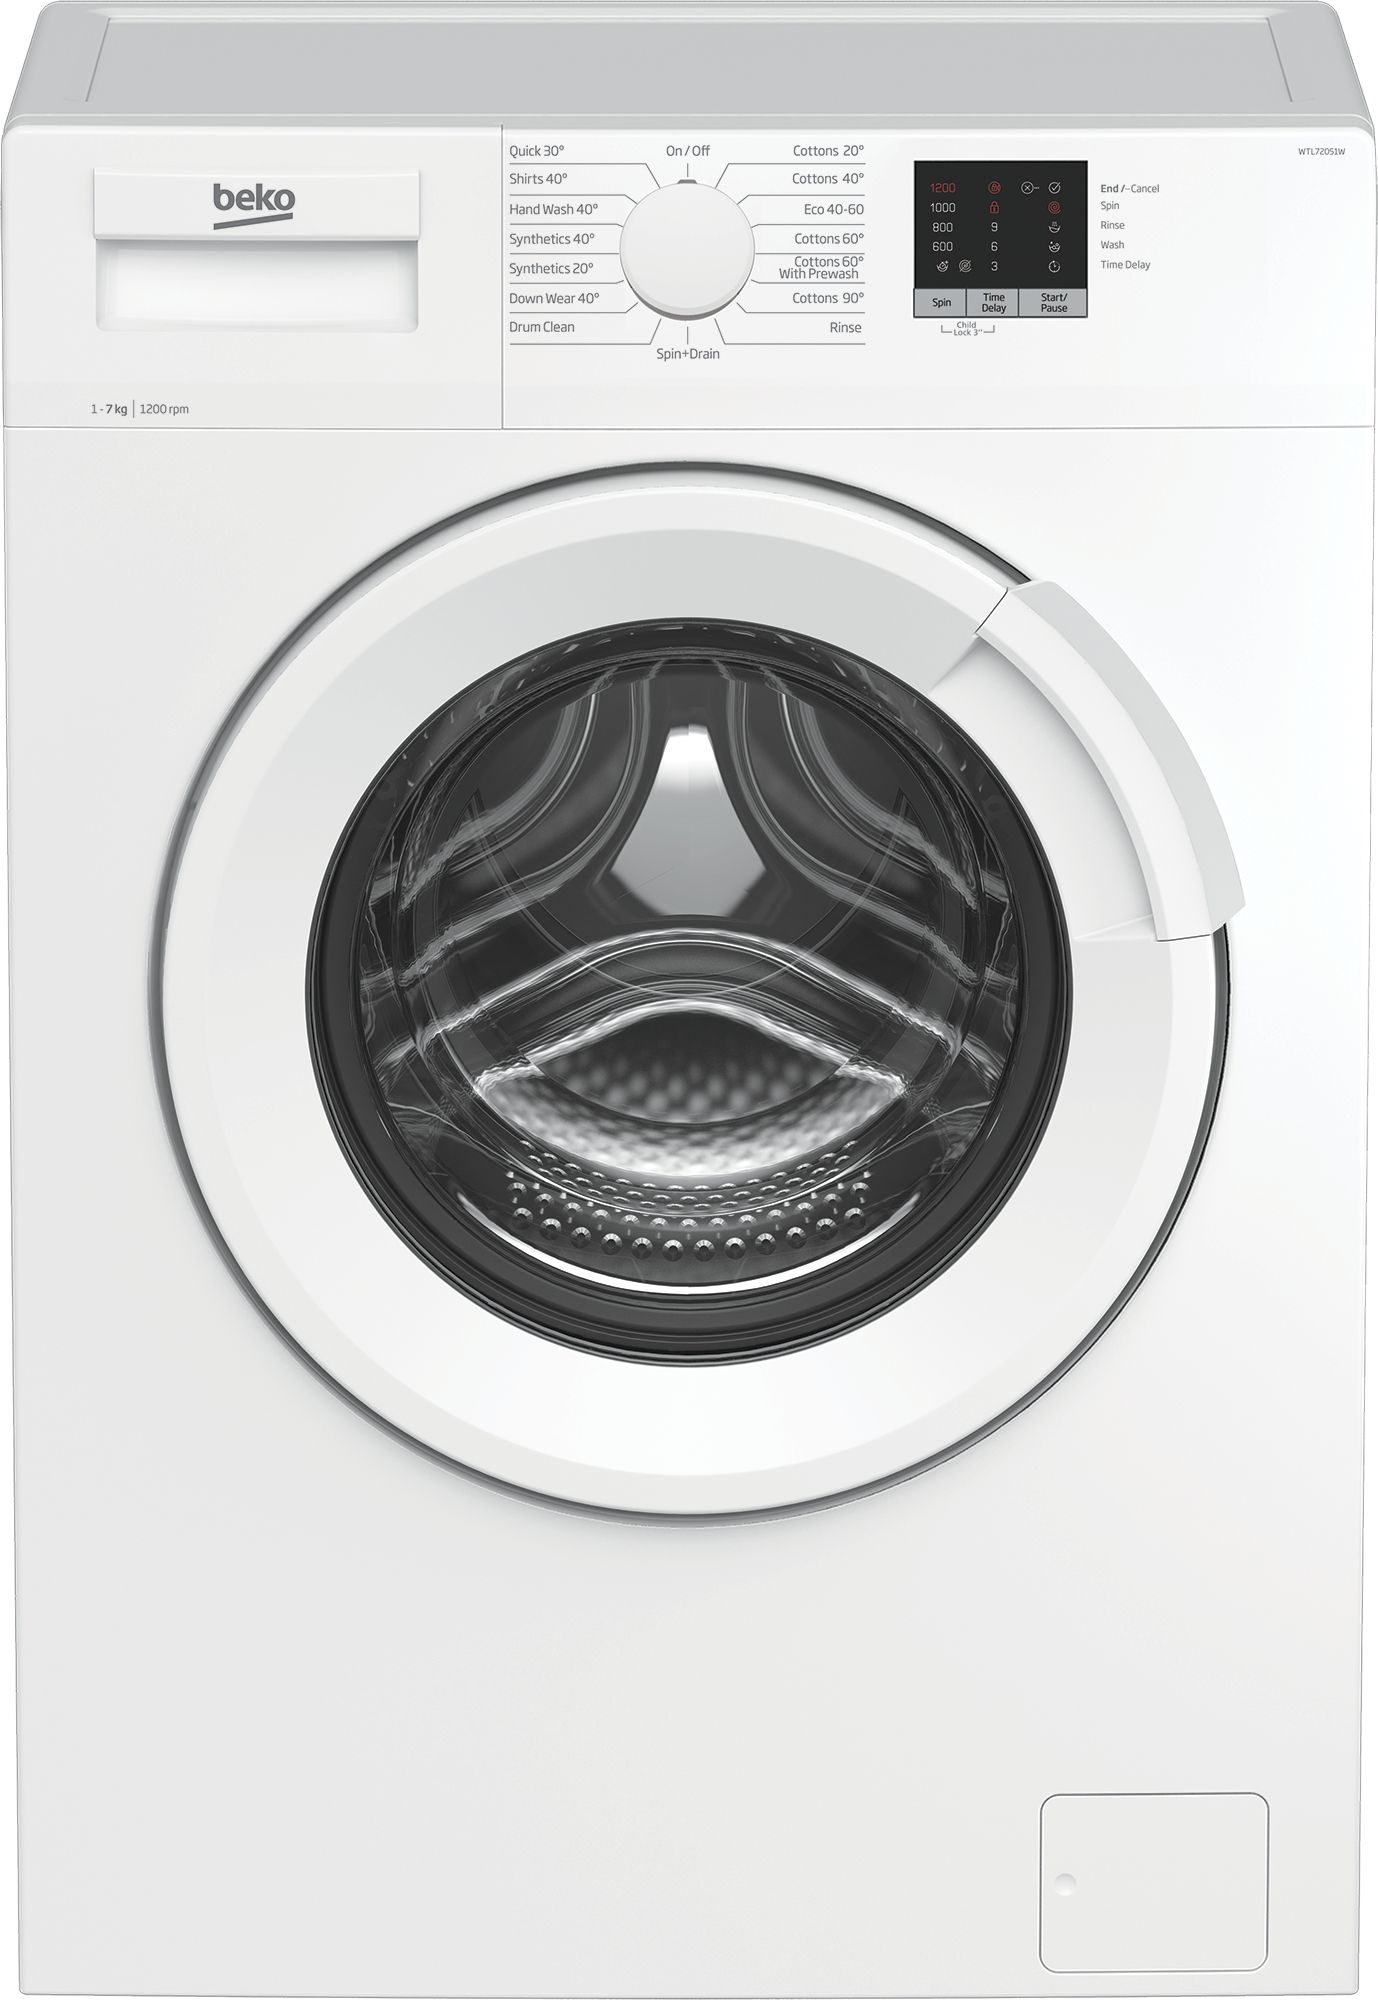 Beko WTL72051W 7kg Washing Machine with 1200 rpm - White - D Rated, White